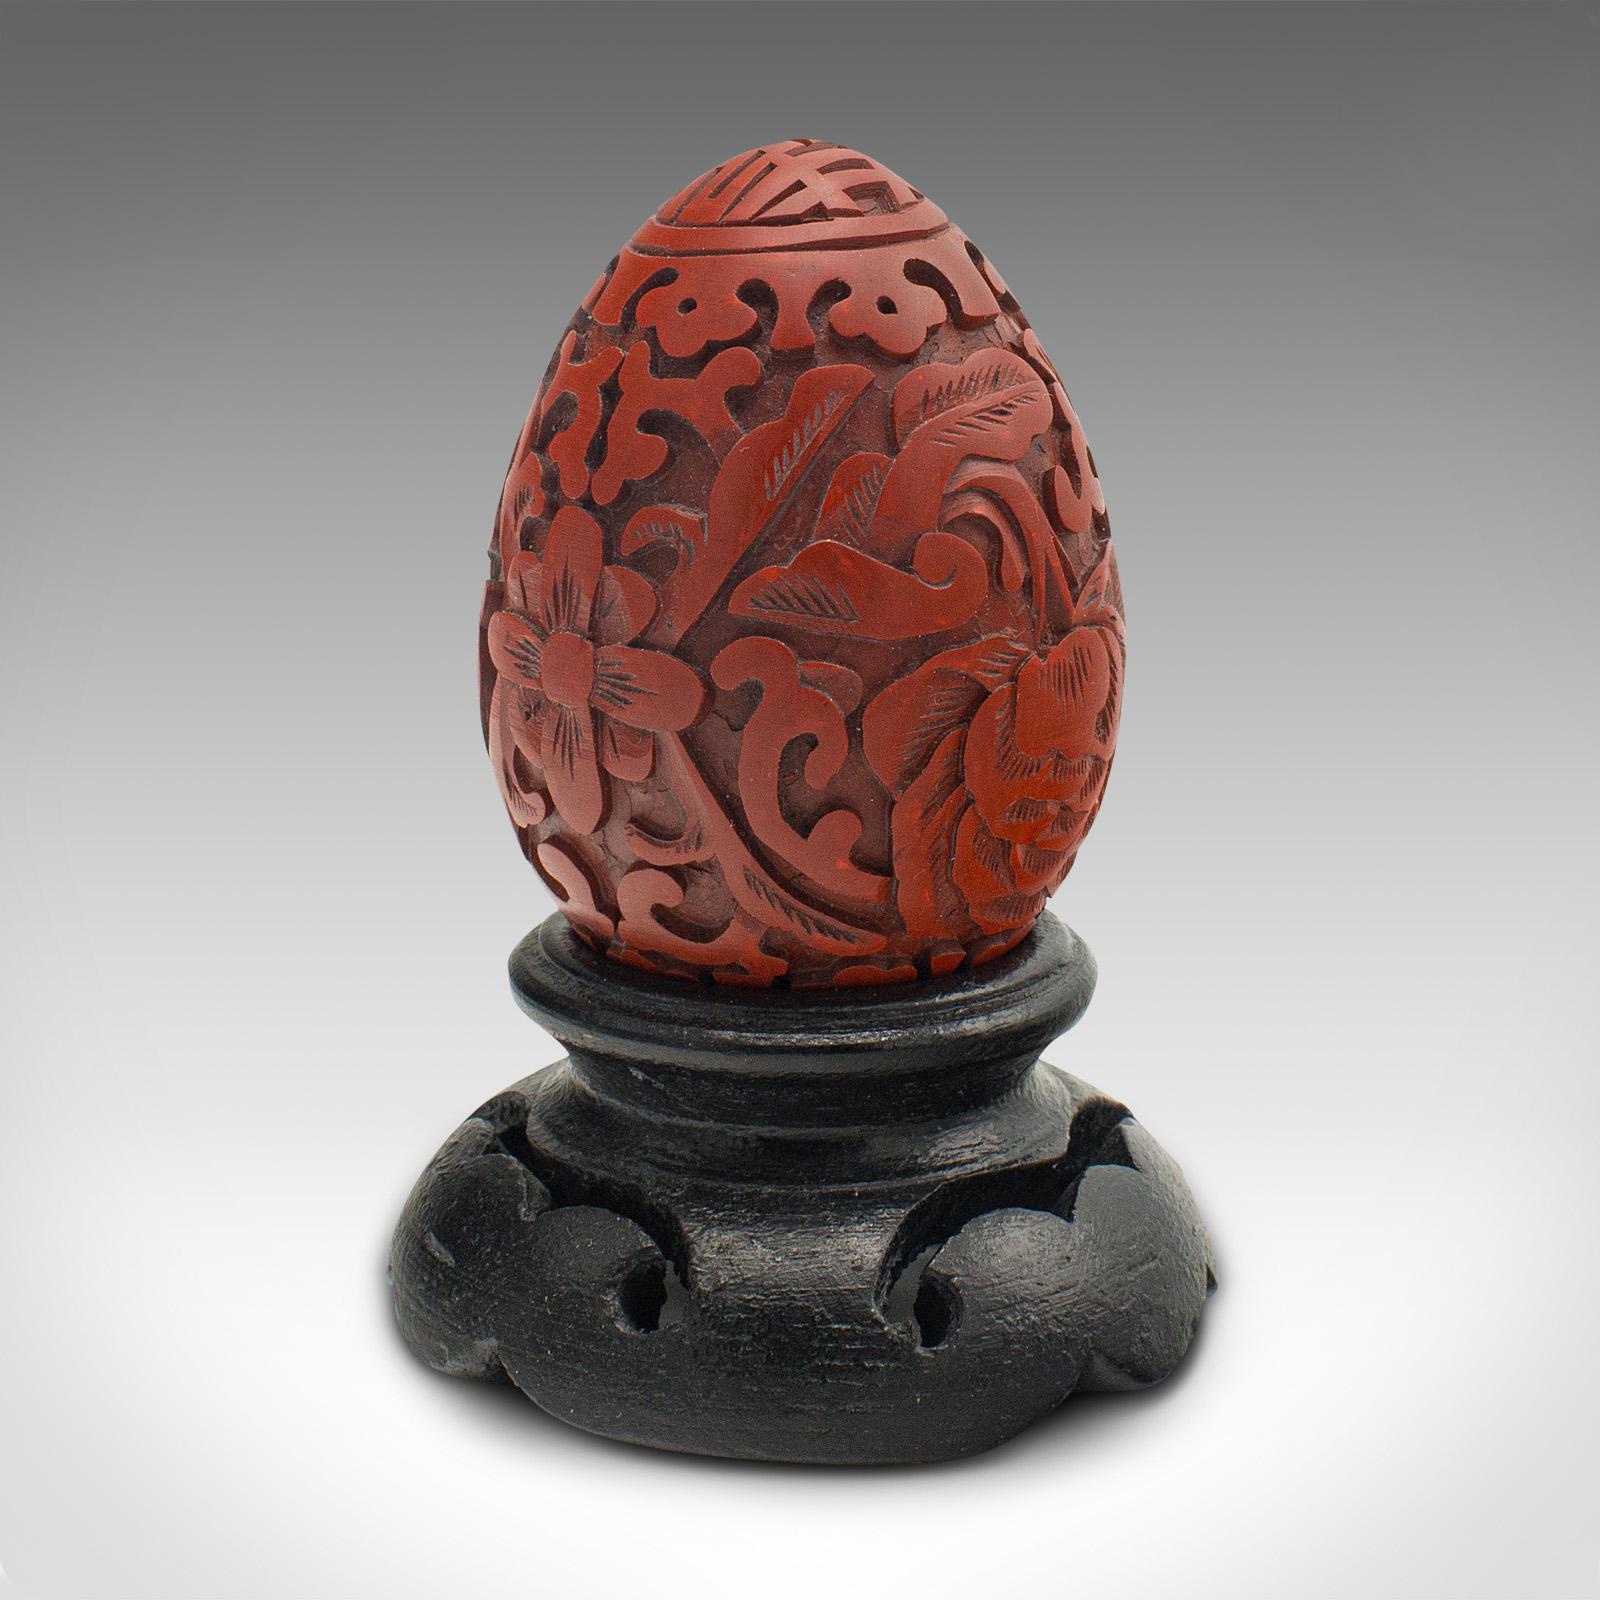 Small Vintage Decorative Egg Chinese Cinnabar, Ornament, Mid-Century, circa 1970 In Good Condition For Sale In Hele, Devon, GB